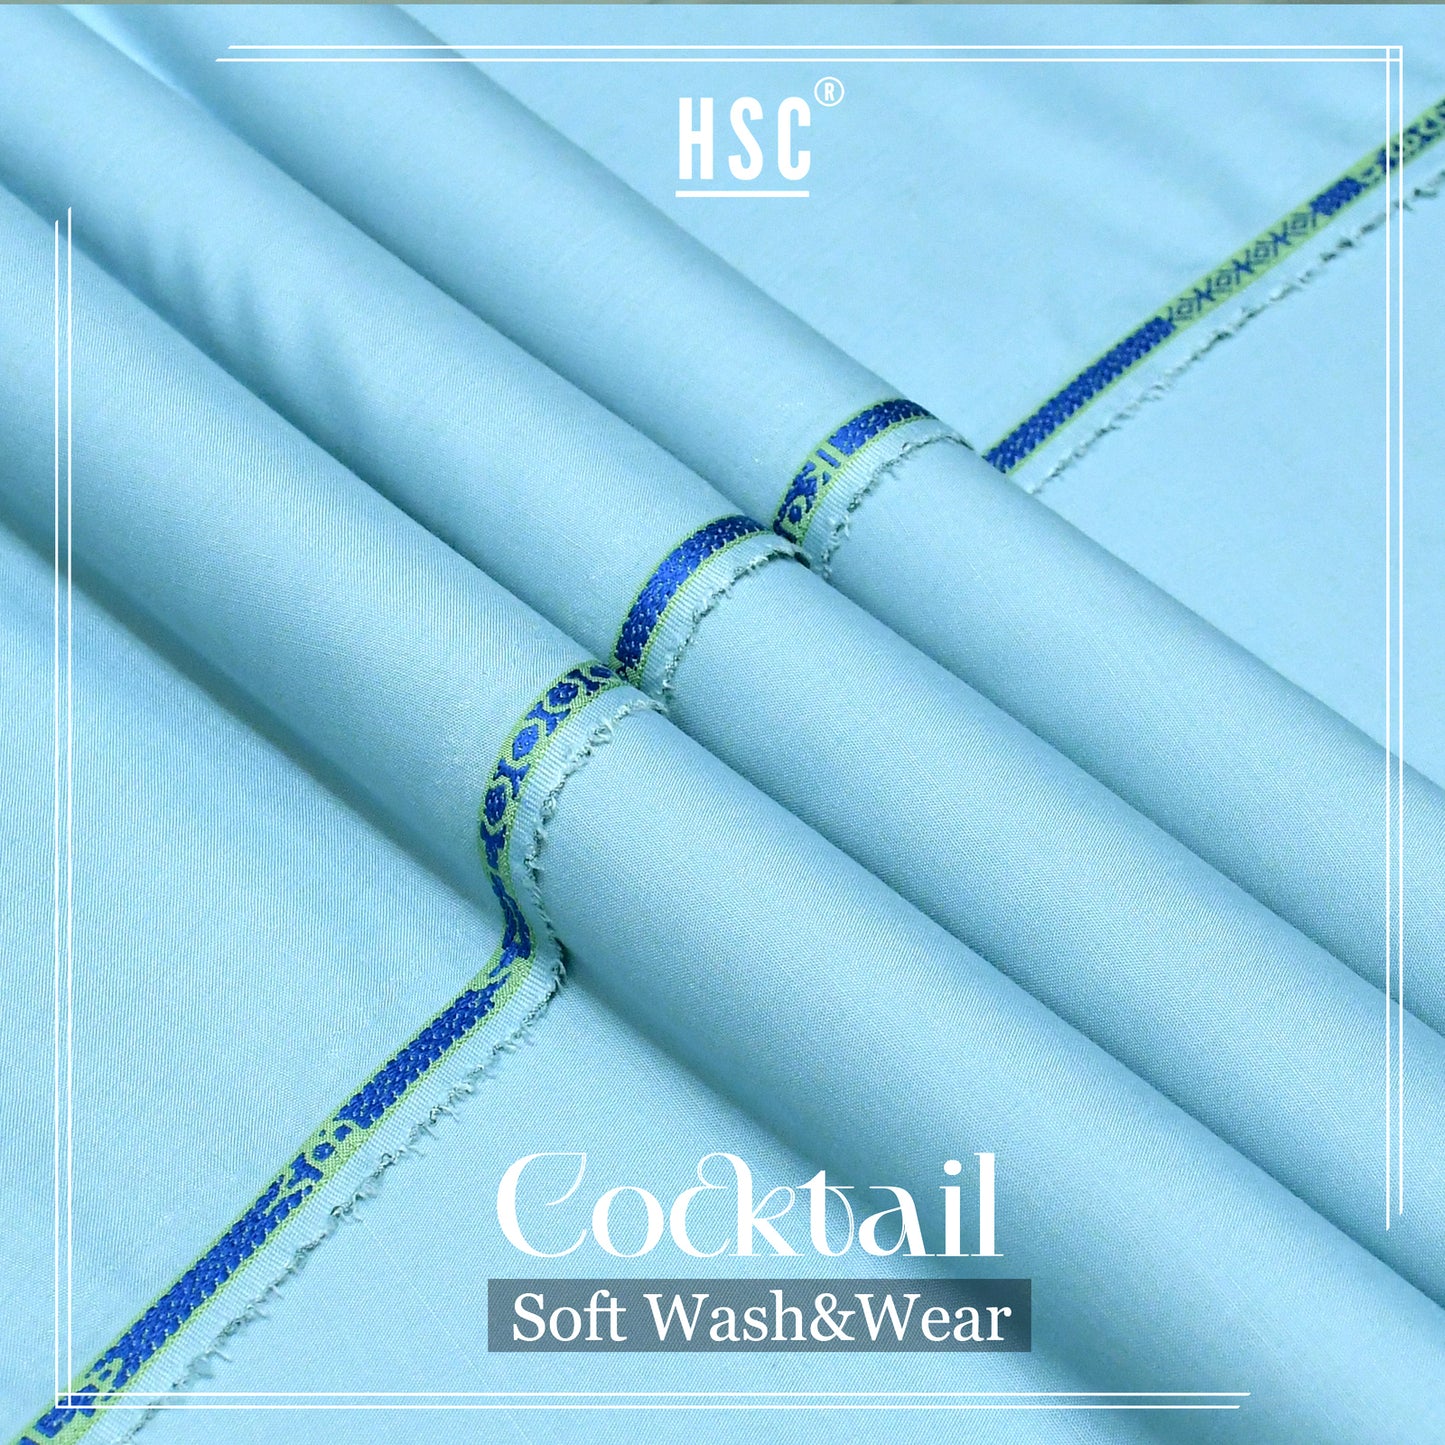 Buy 1 Get 1 Free Cocktail Soft Wash&Wear - CSW15 HSC BLENDED